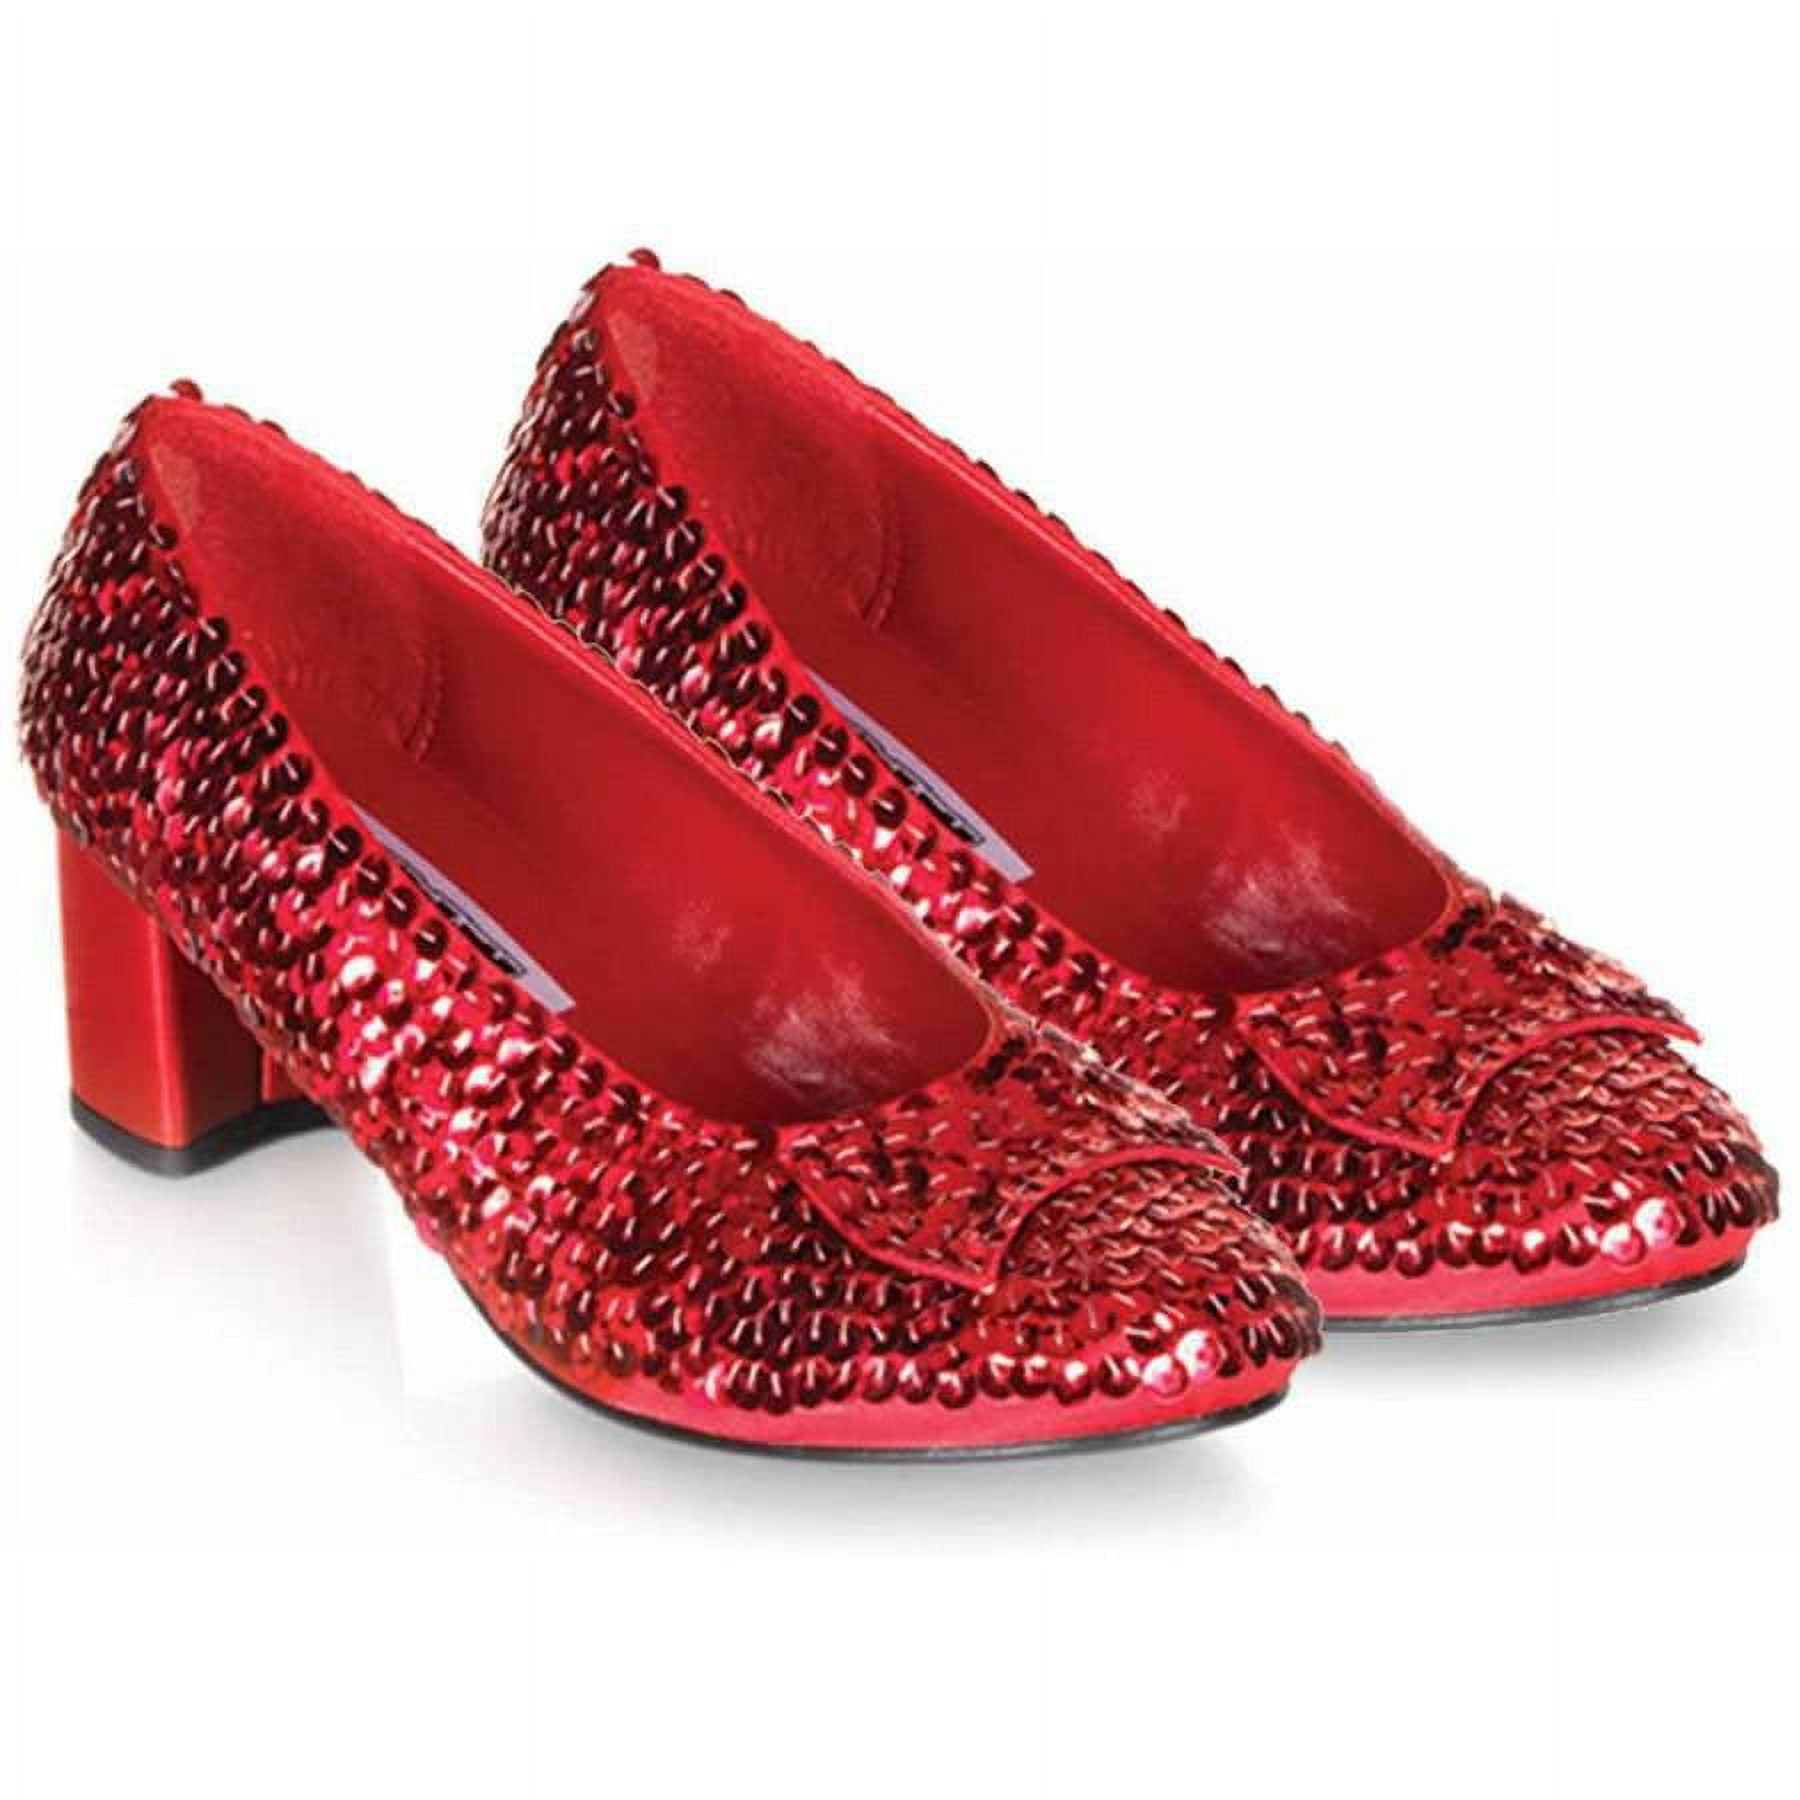 SOLD OUT! Ruby Red Sparkling Sequins Women's Slip On Shoes Size L 9-10